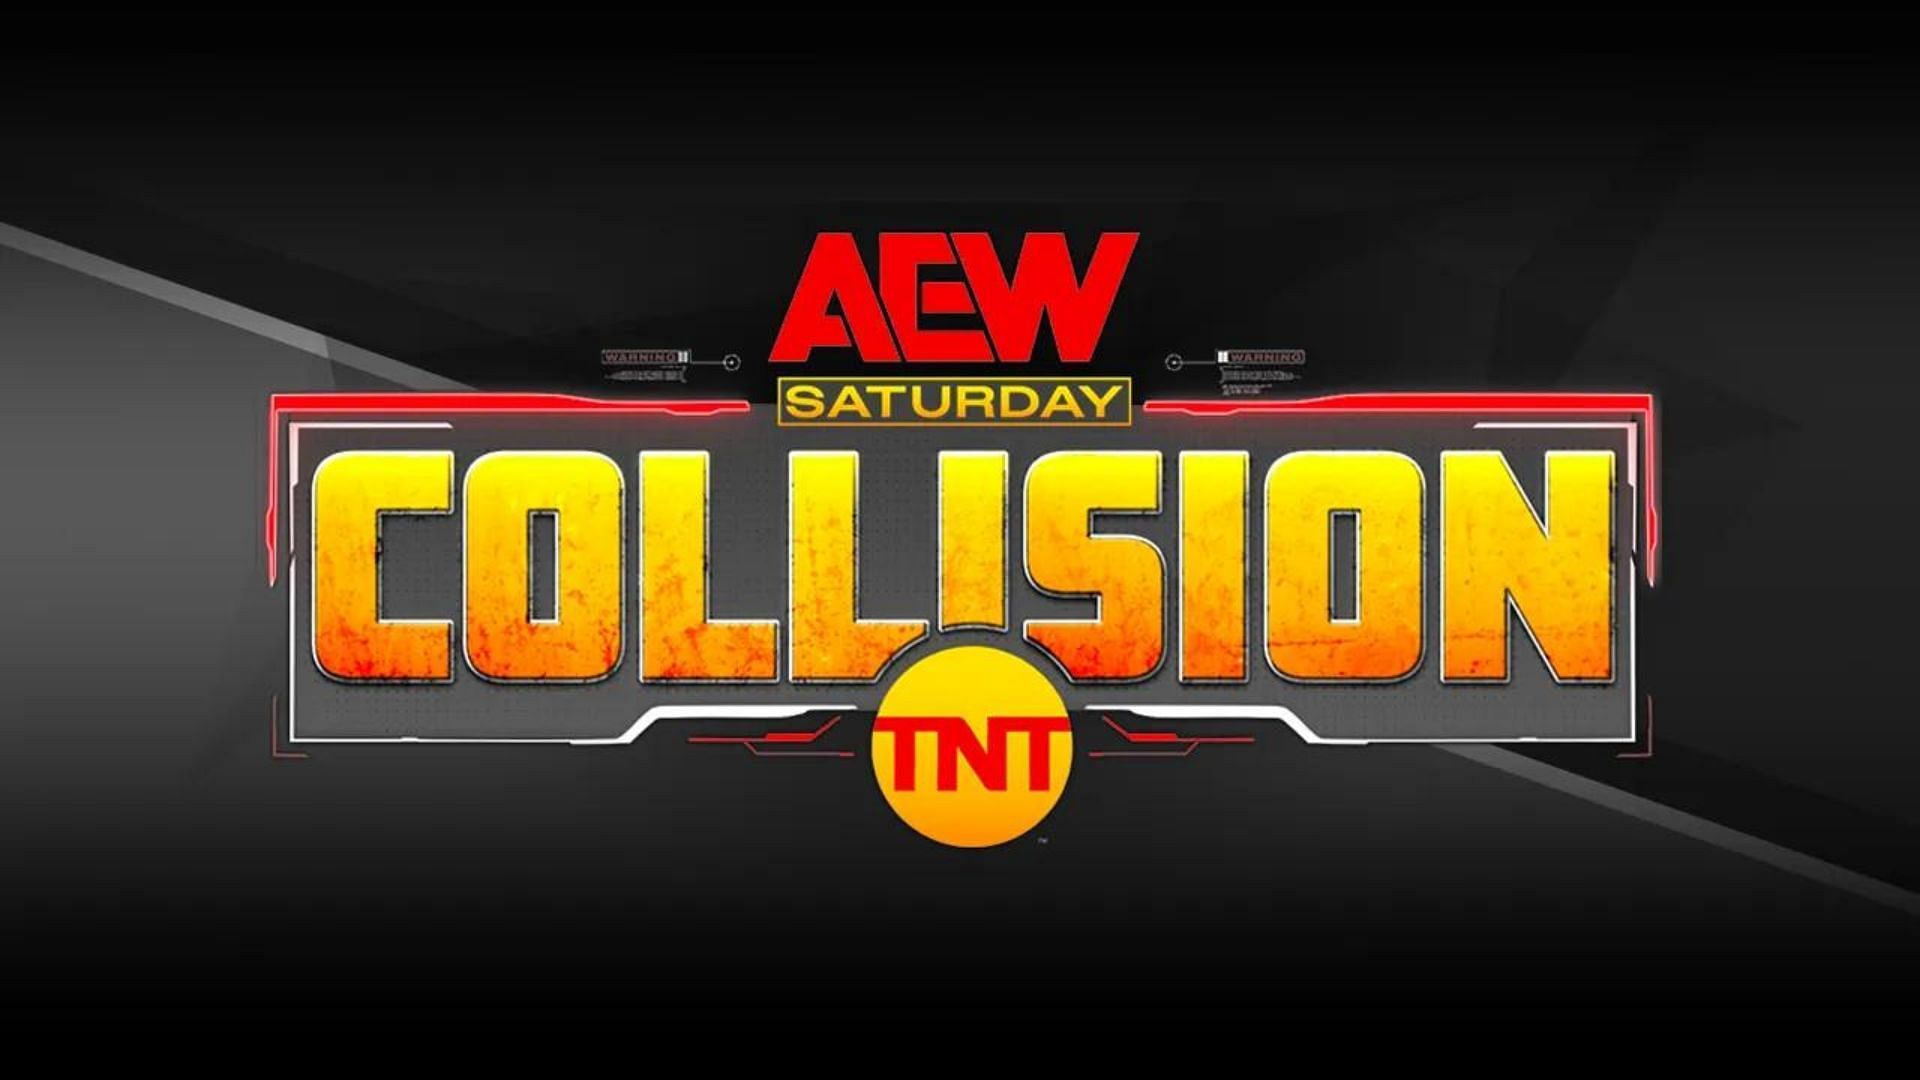 AEW Collision has been a solid addition to the brand so far